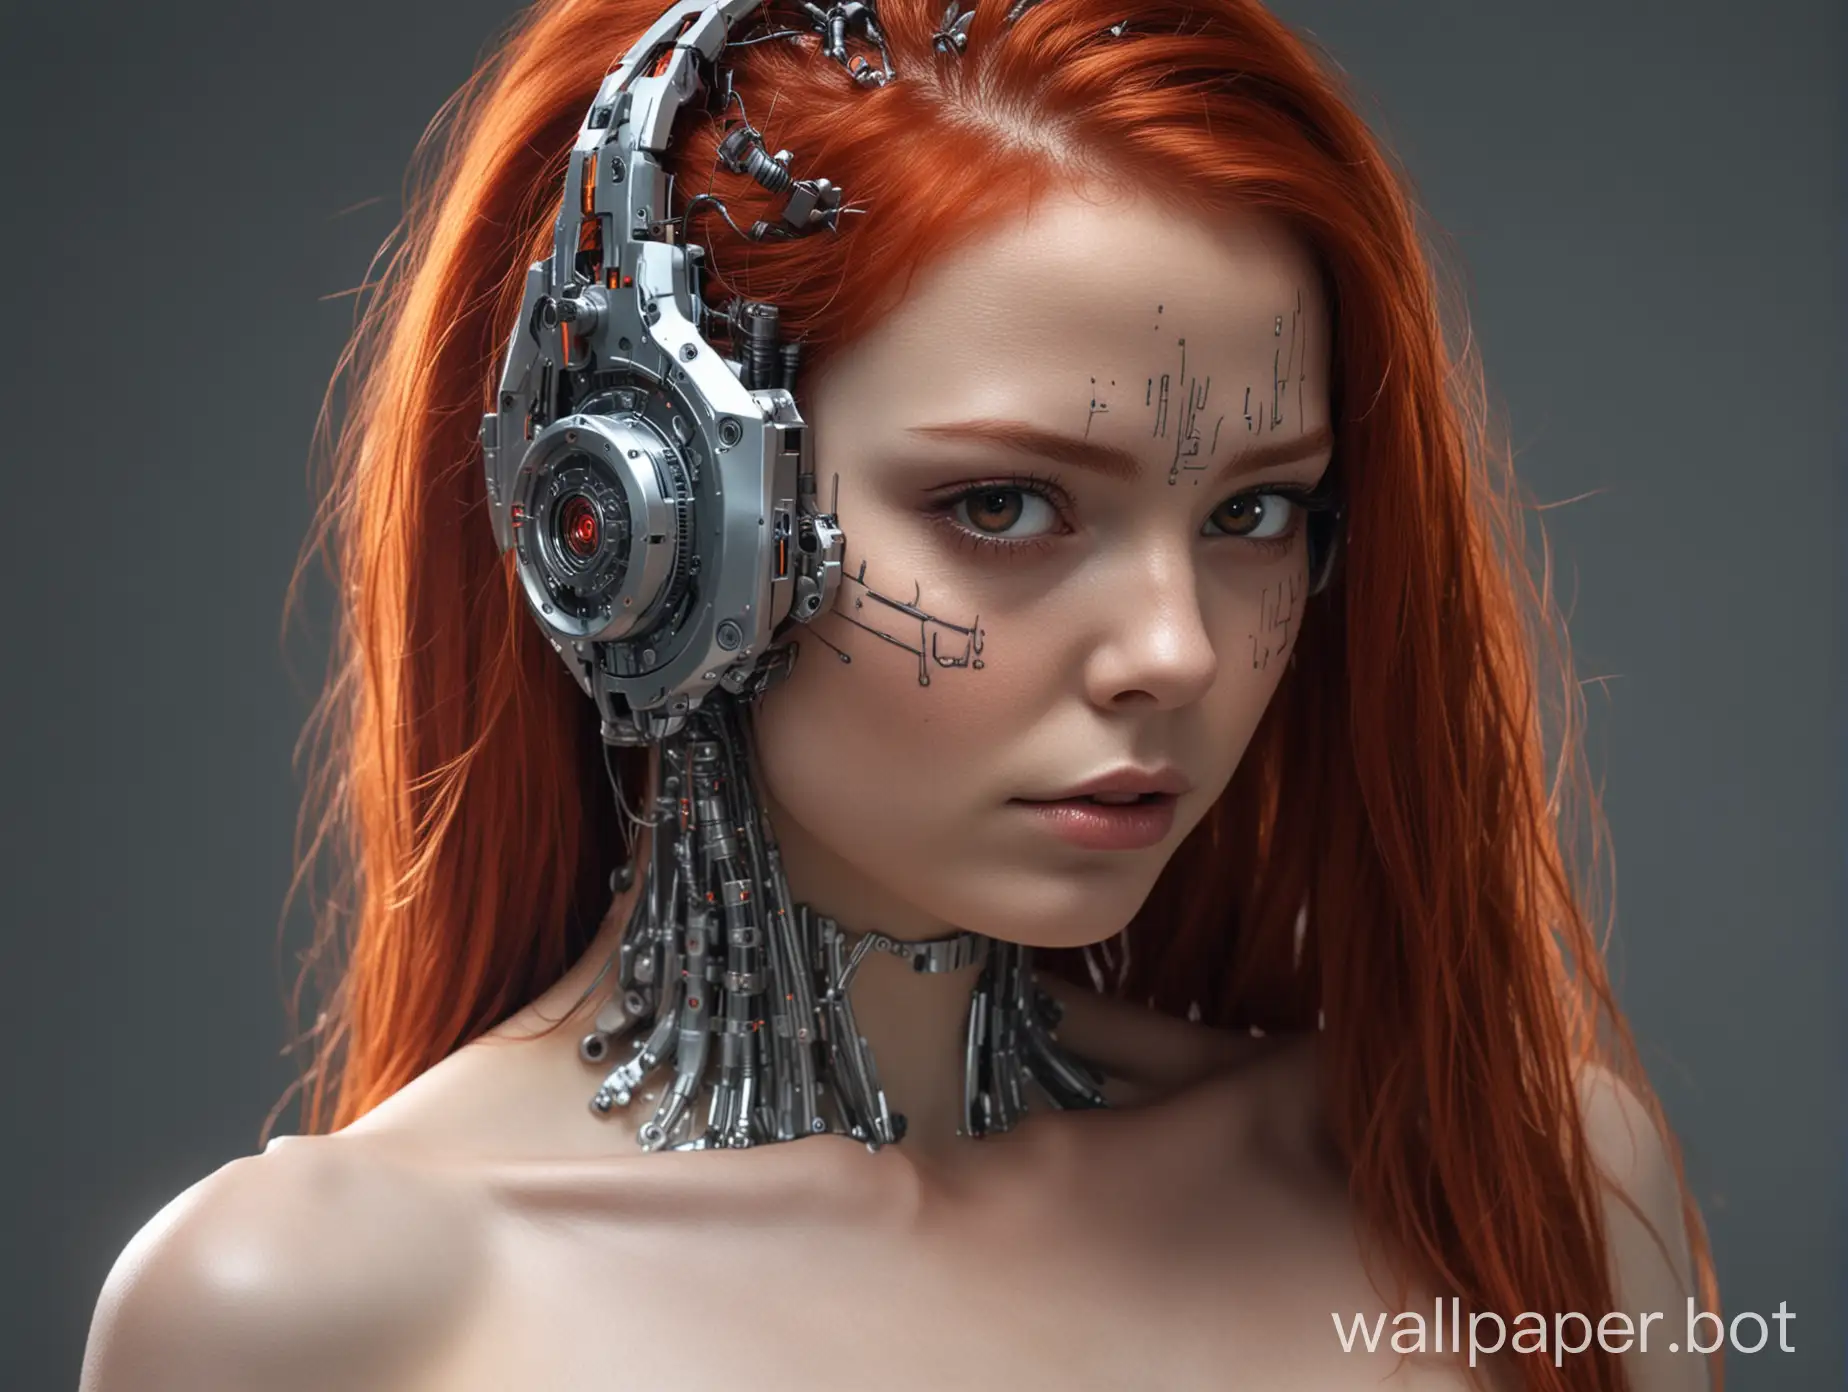 Fiery-RedHaired-Cyborg-Futuristic-Woman-with-Laser-Vision-and-Cyber-Implants